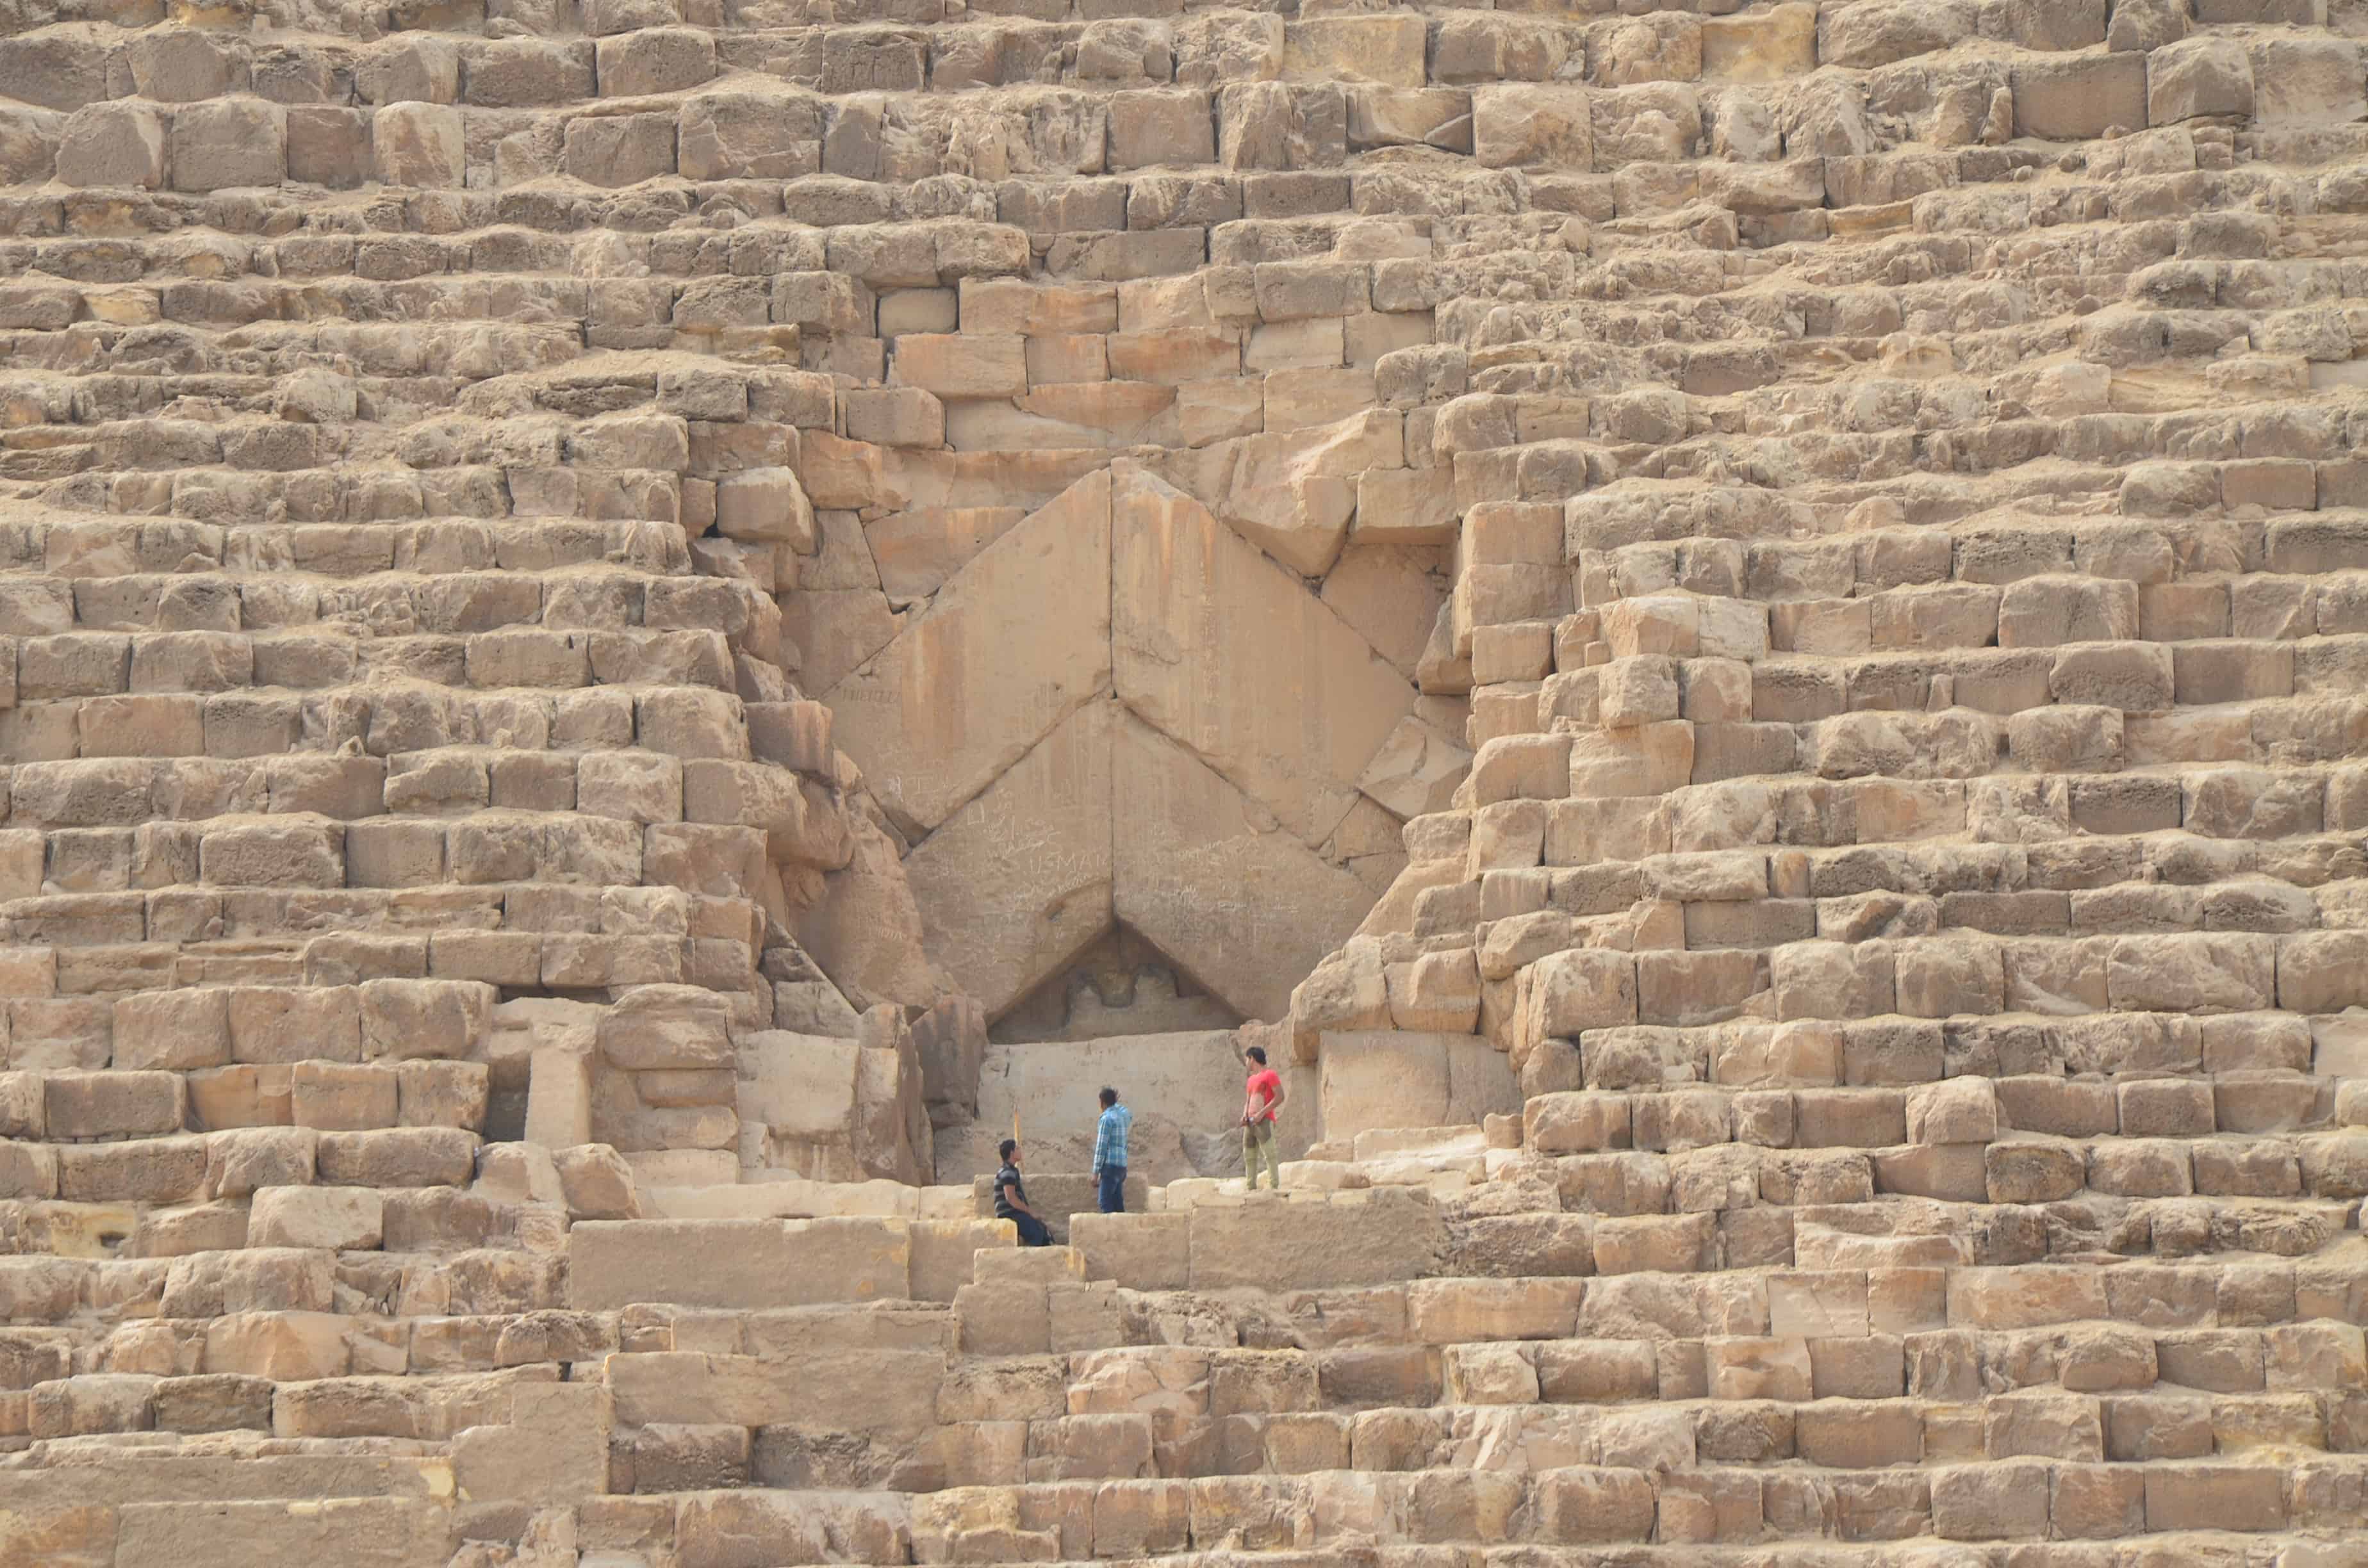 Entrance to the Pyramid of Khufu at the Pyramids of Giza in Egypt